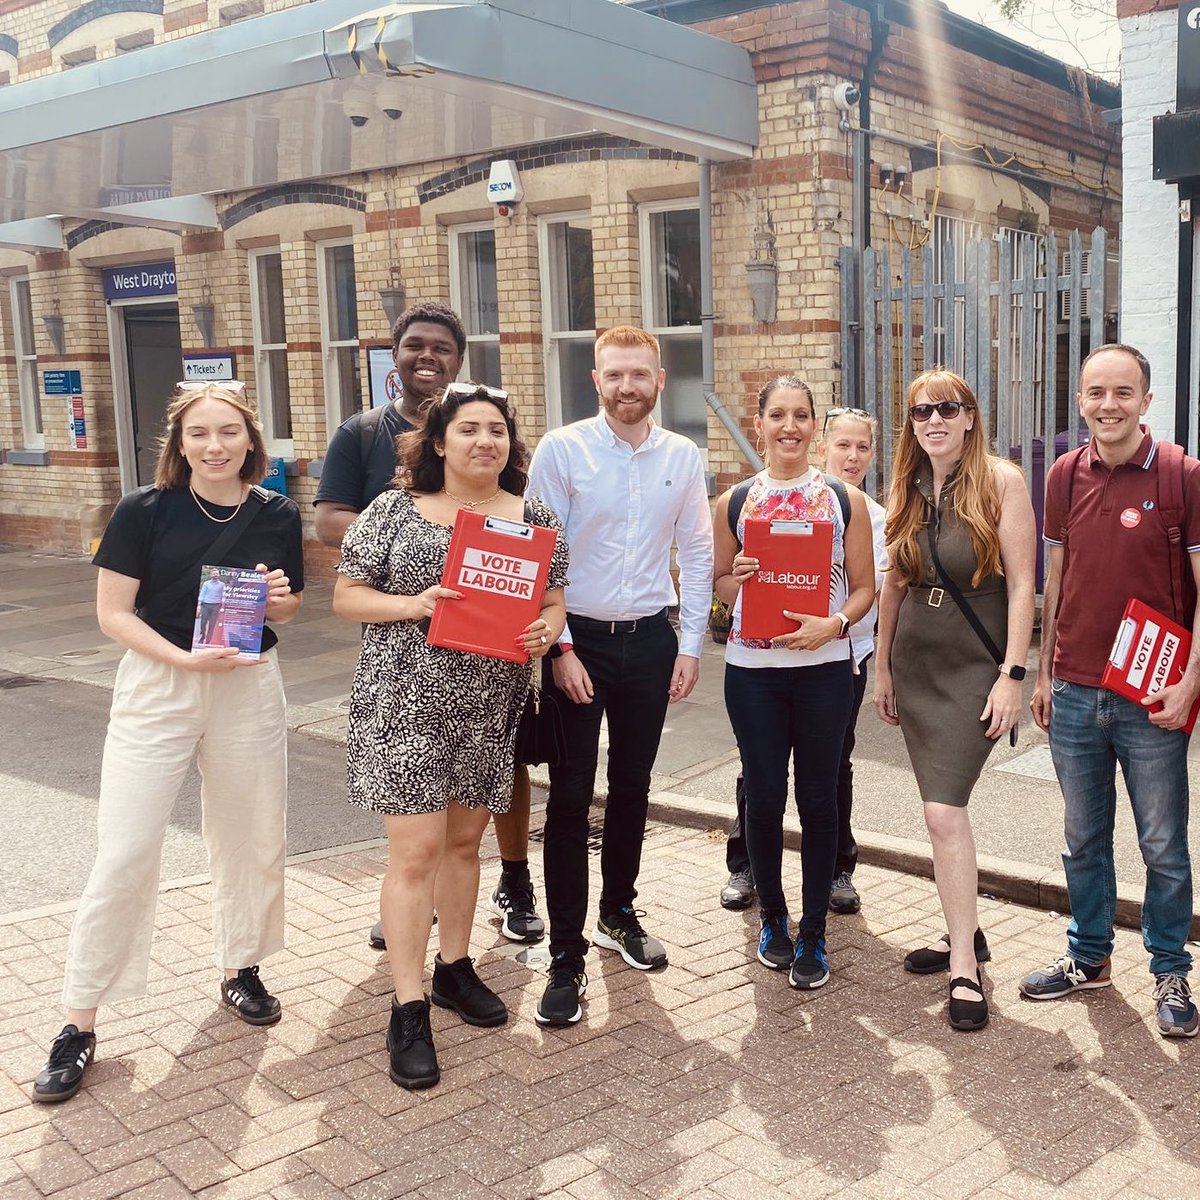 Out with the team in West Drayton today campaigning for an MP who’ll put voters first.

The Tories have taken people here for granted. @DannyBeales will give Uxbridge and South Ruislip the fresh start it deserves. #VoteLabour 🌹